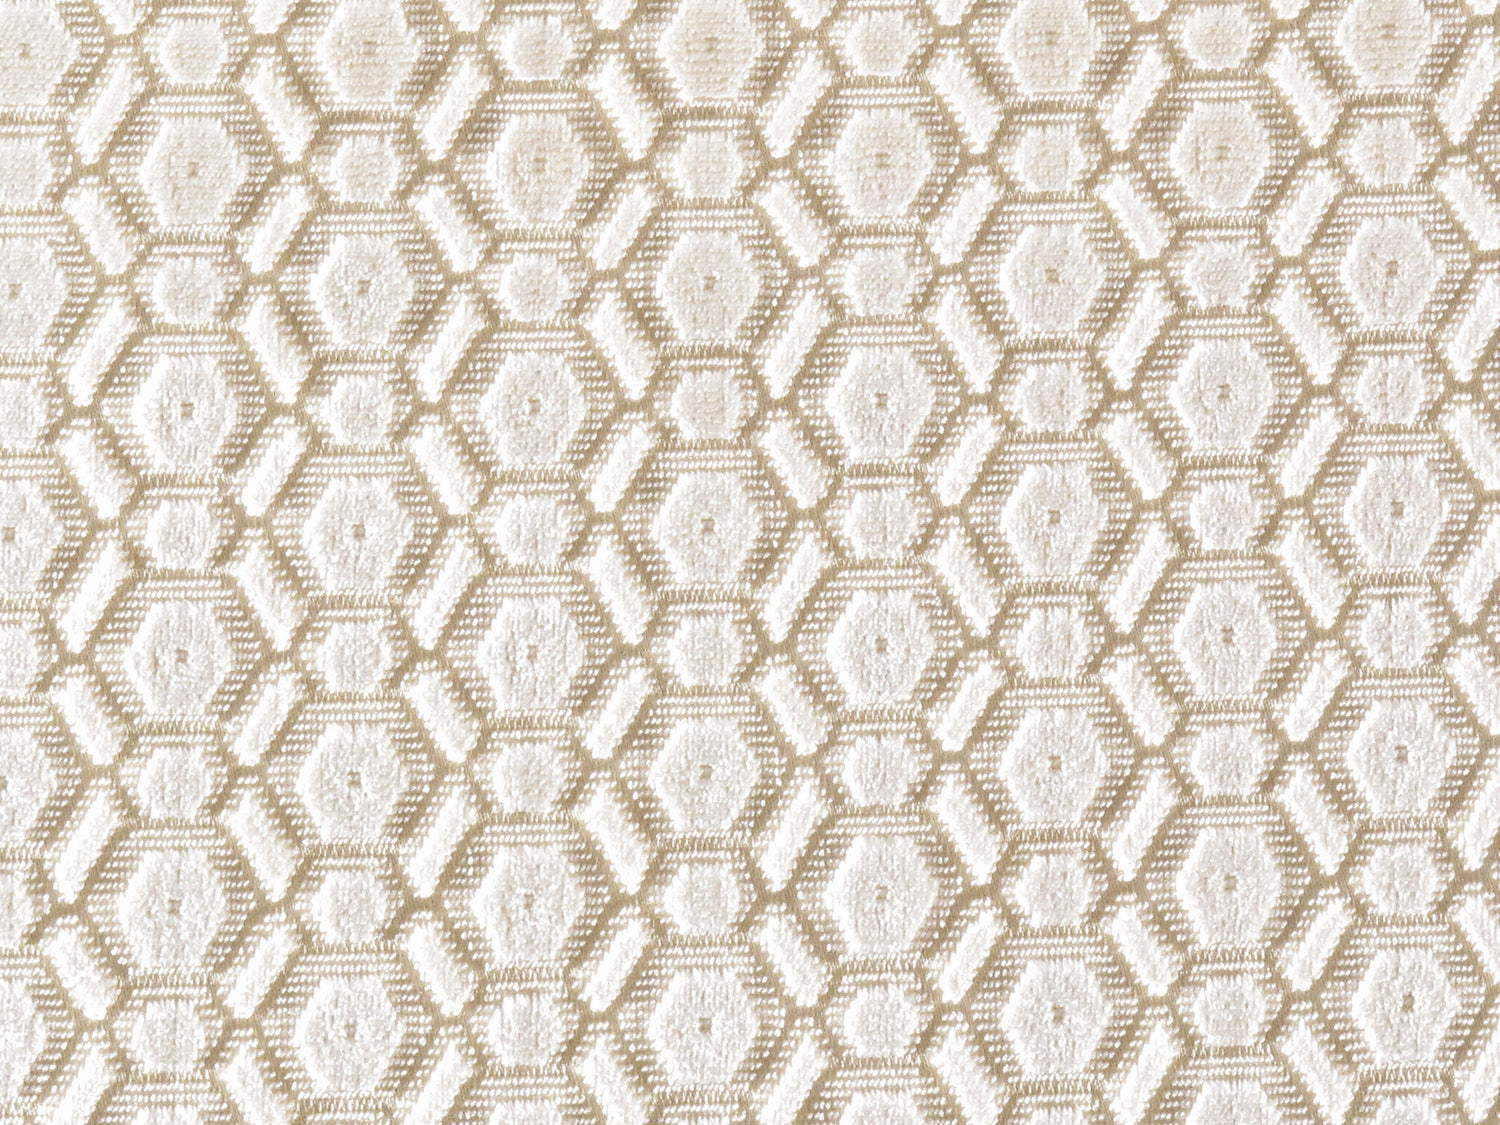 Manetta fabric in ivory color - pattern number ZS 0003MANE - by Scalamandre in the Old World Weavers collection